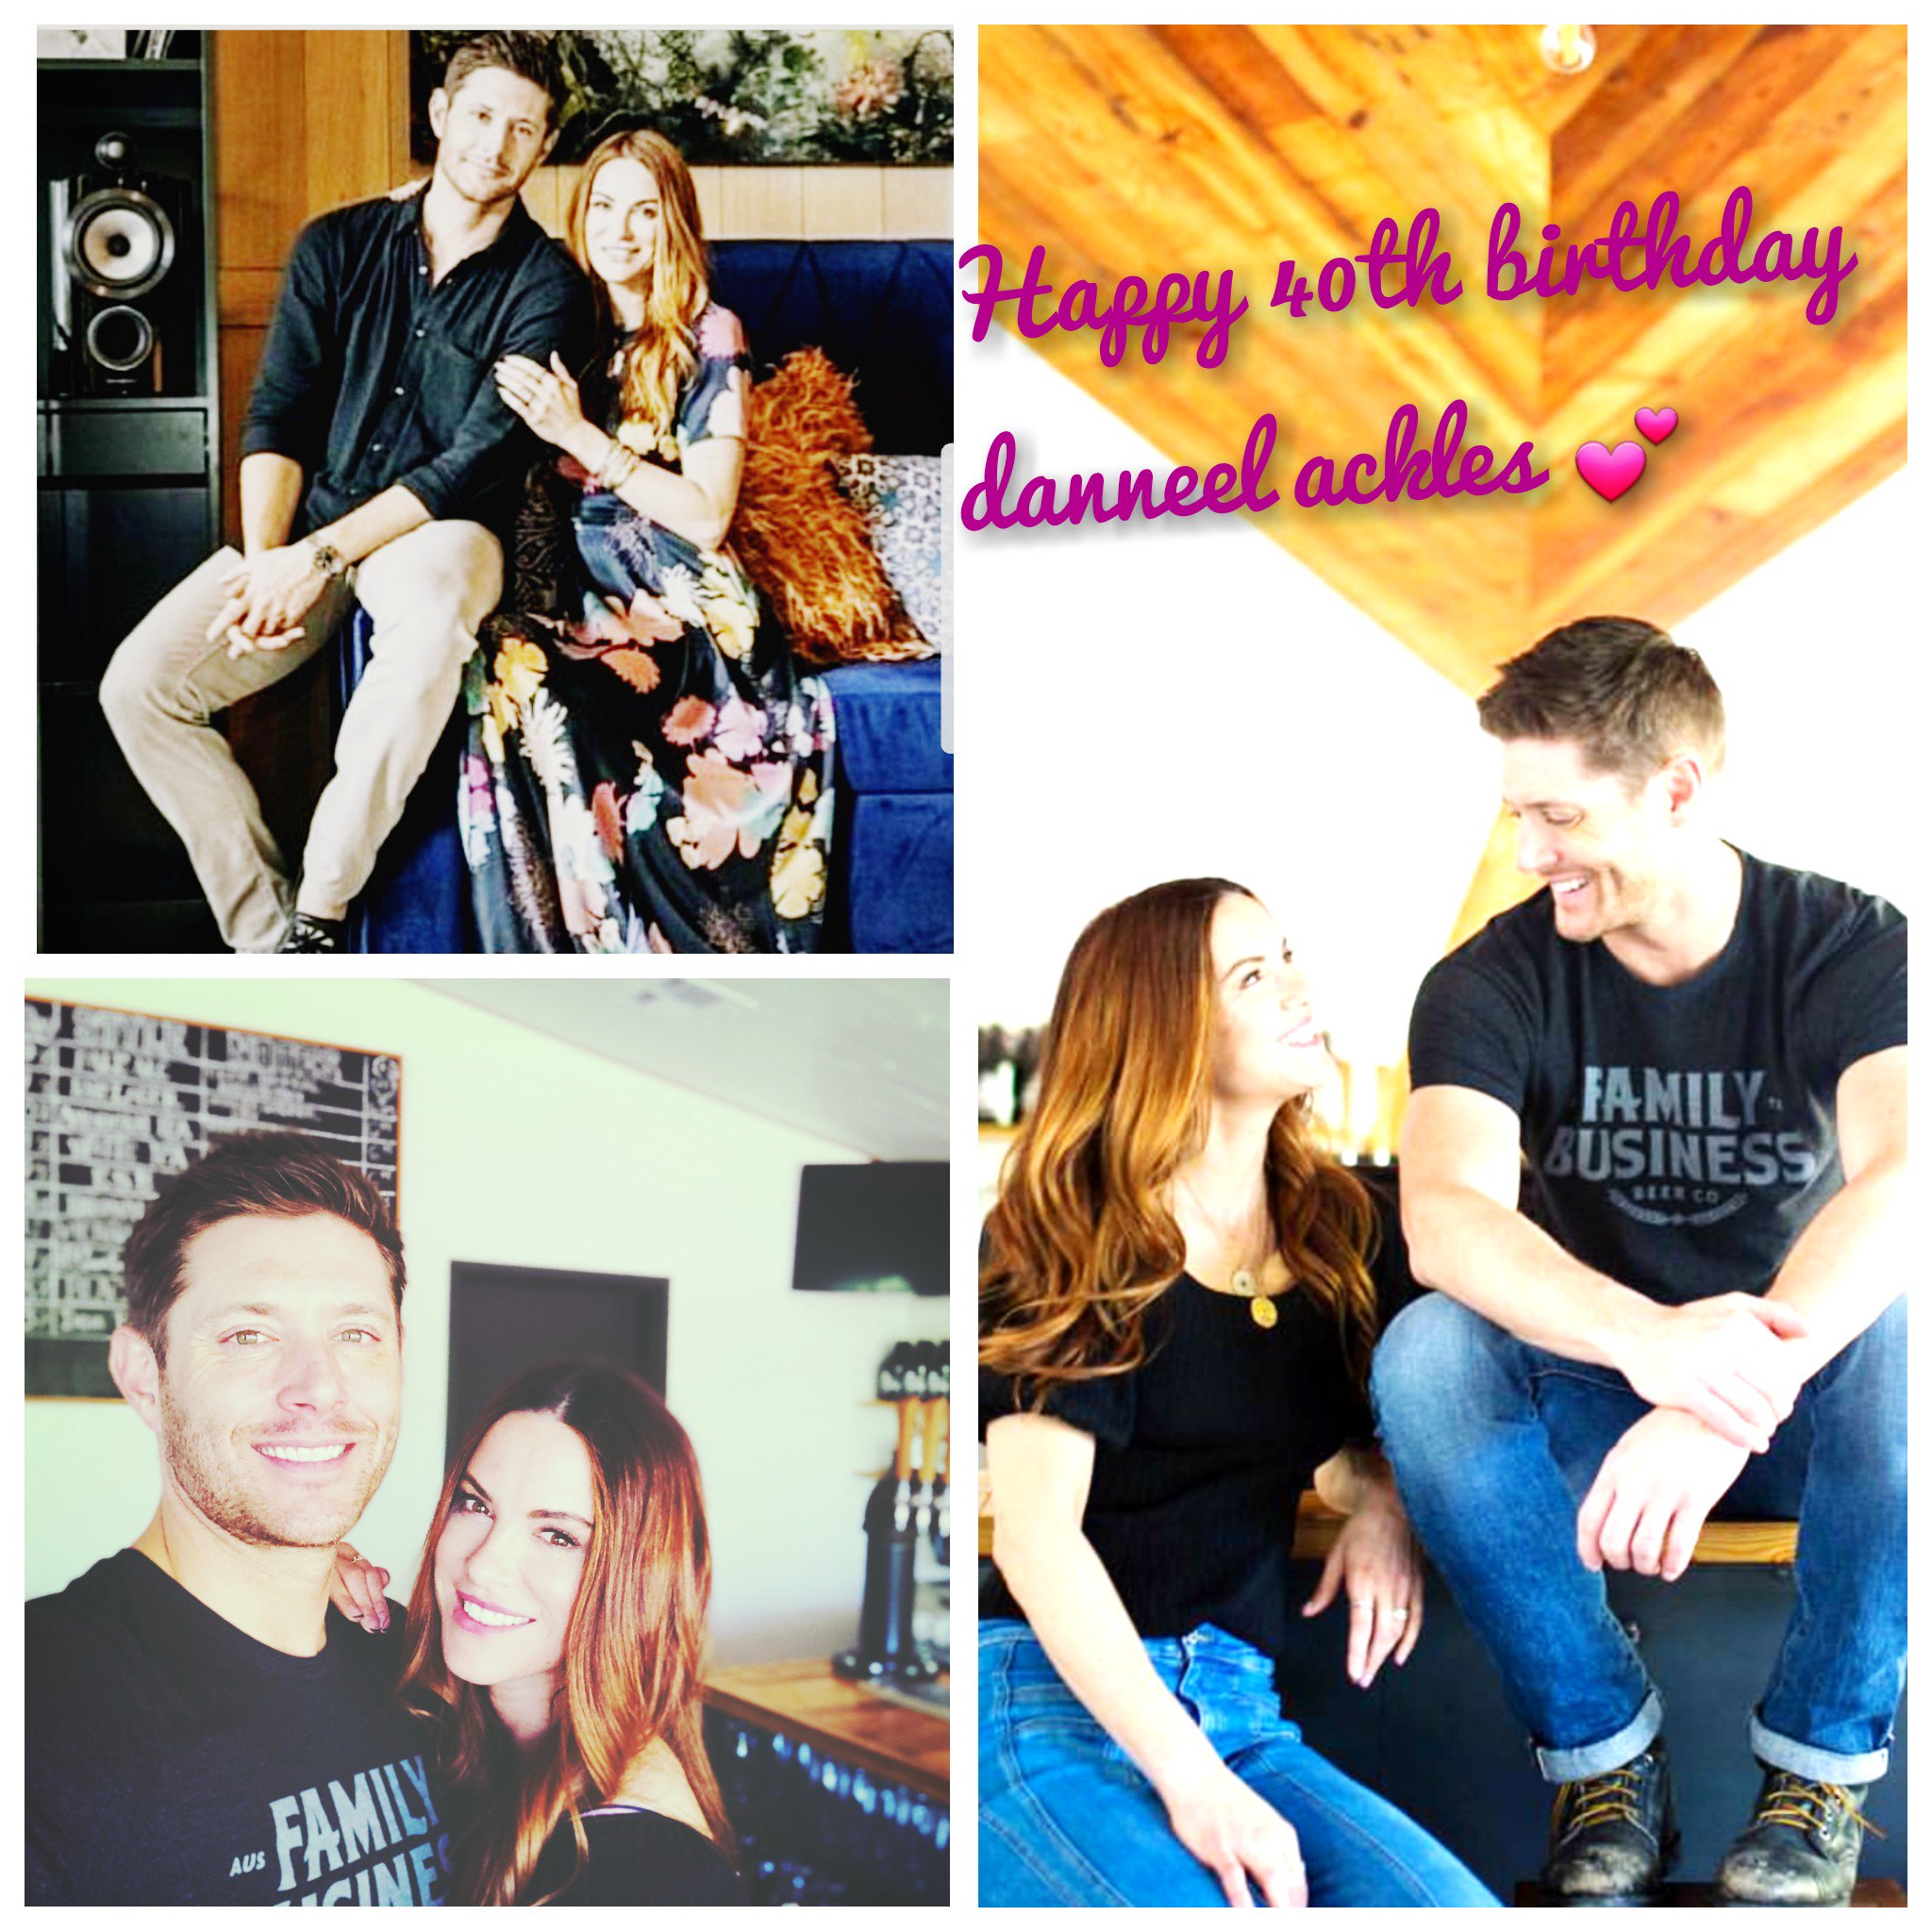 Happy 40th birthday danneel ackles I hope you enjoying today love you so much     